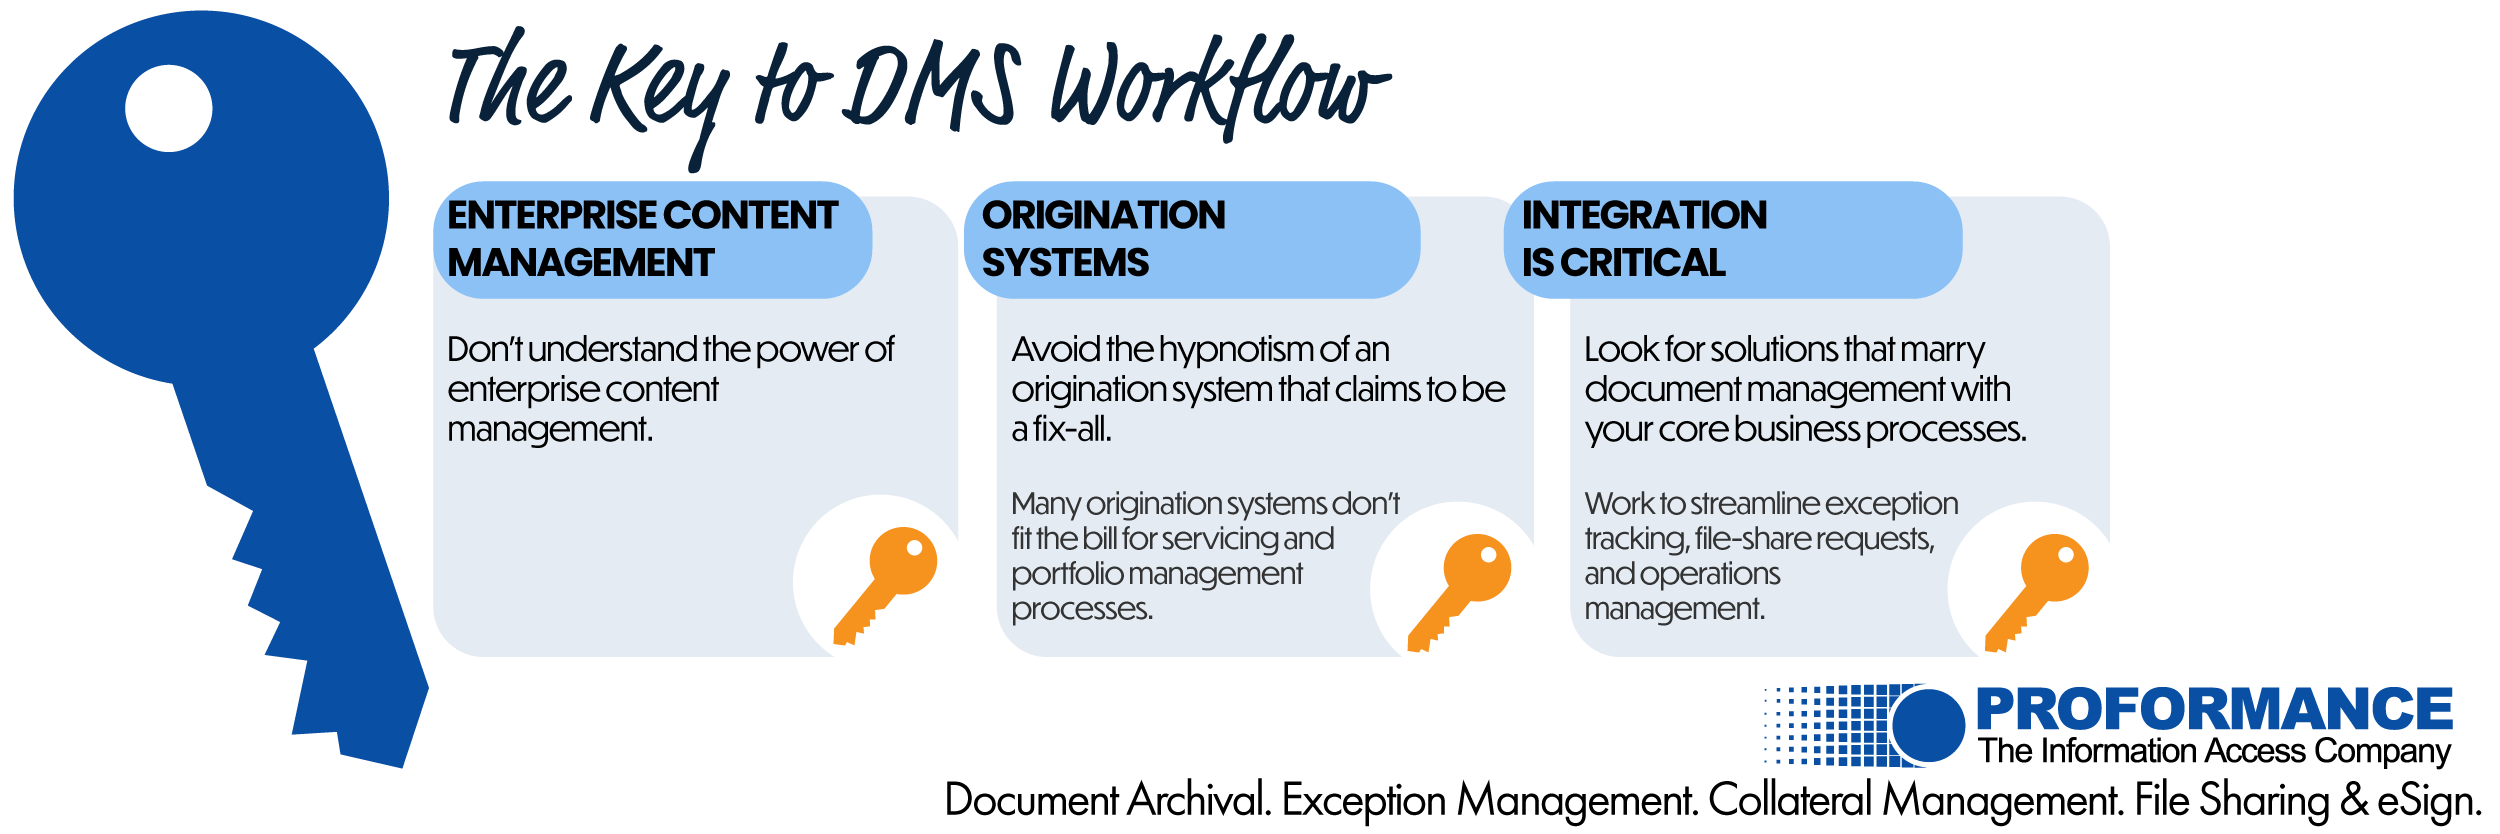 the key to dms workflow-01